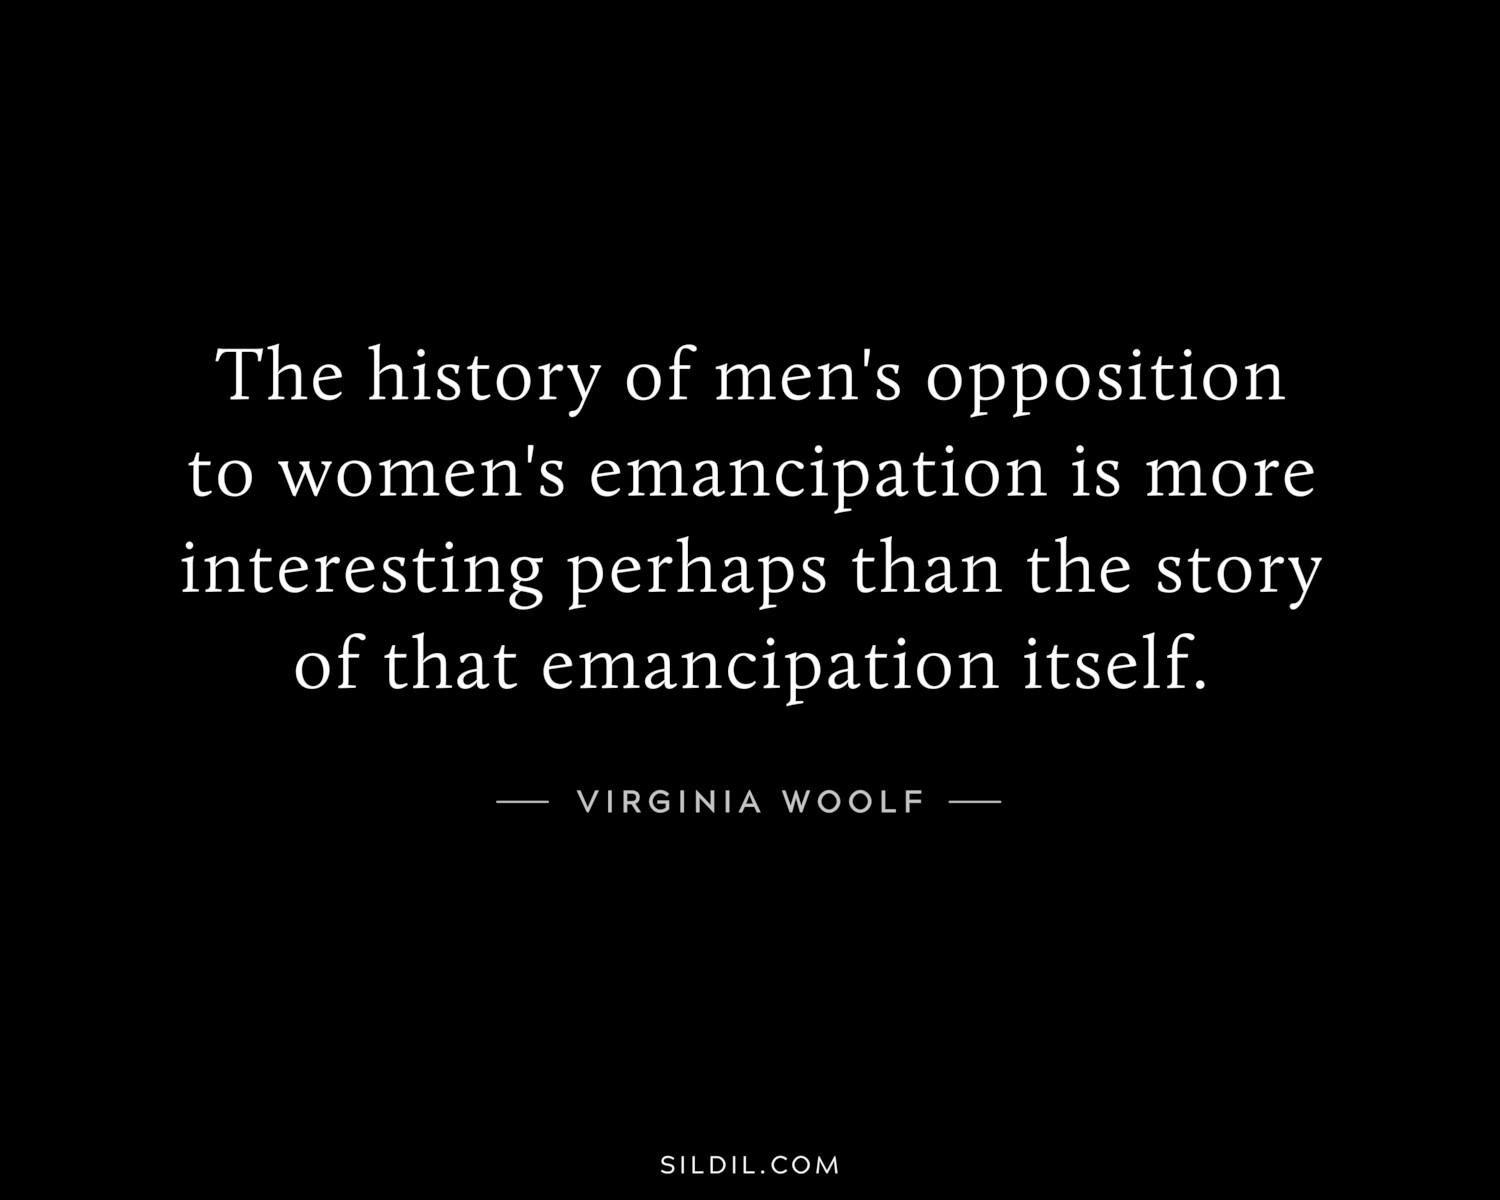 The history of men's opposition to women's emancipation is more interesting perhaps than the story of that emancipation itself.